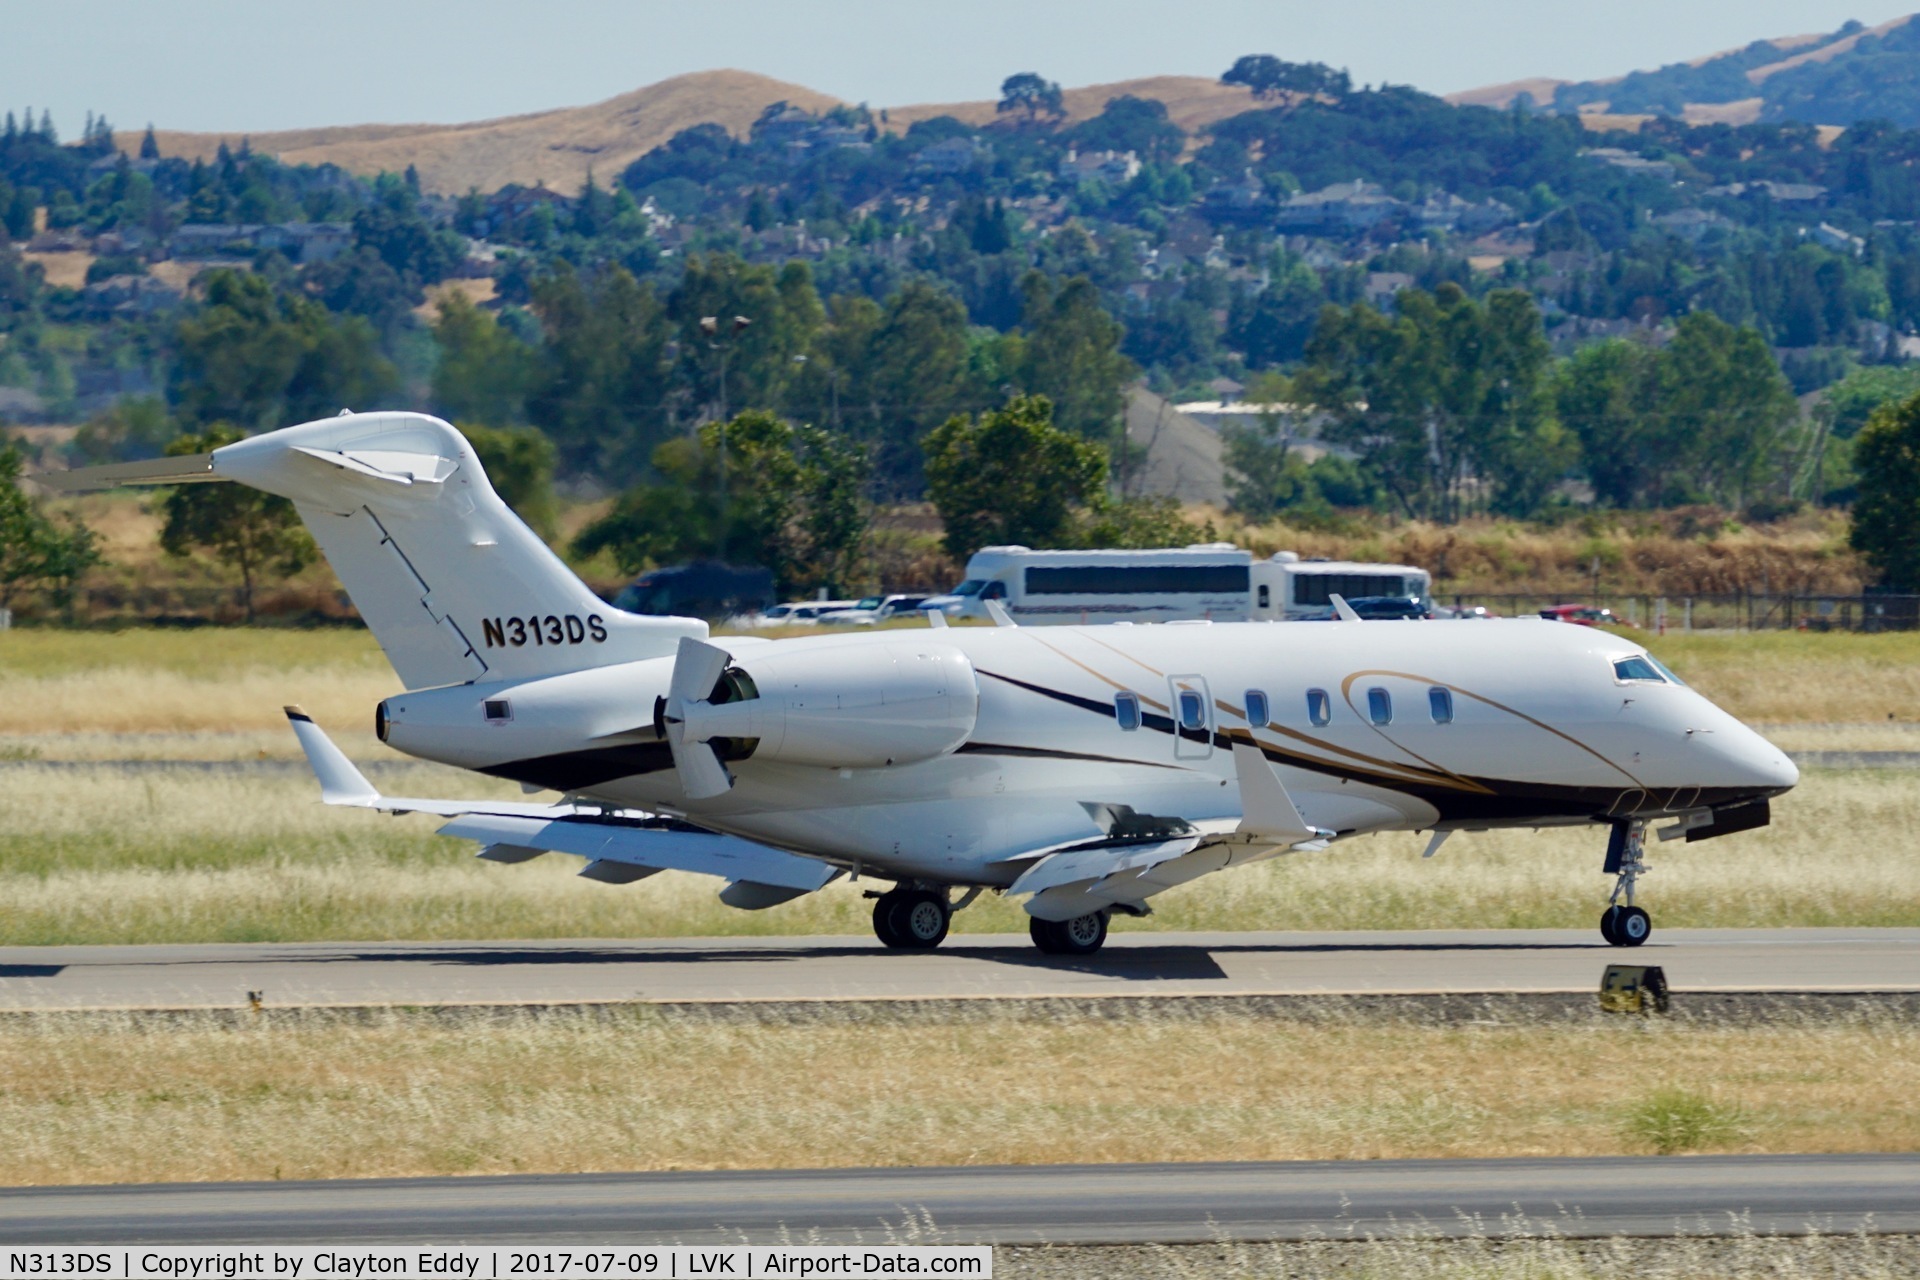 N313DS, 2007 Bombardier Challenger 300 (BD-100-1A10) C/N 20183, Livermore Airport California. 2017.